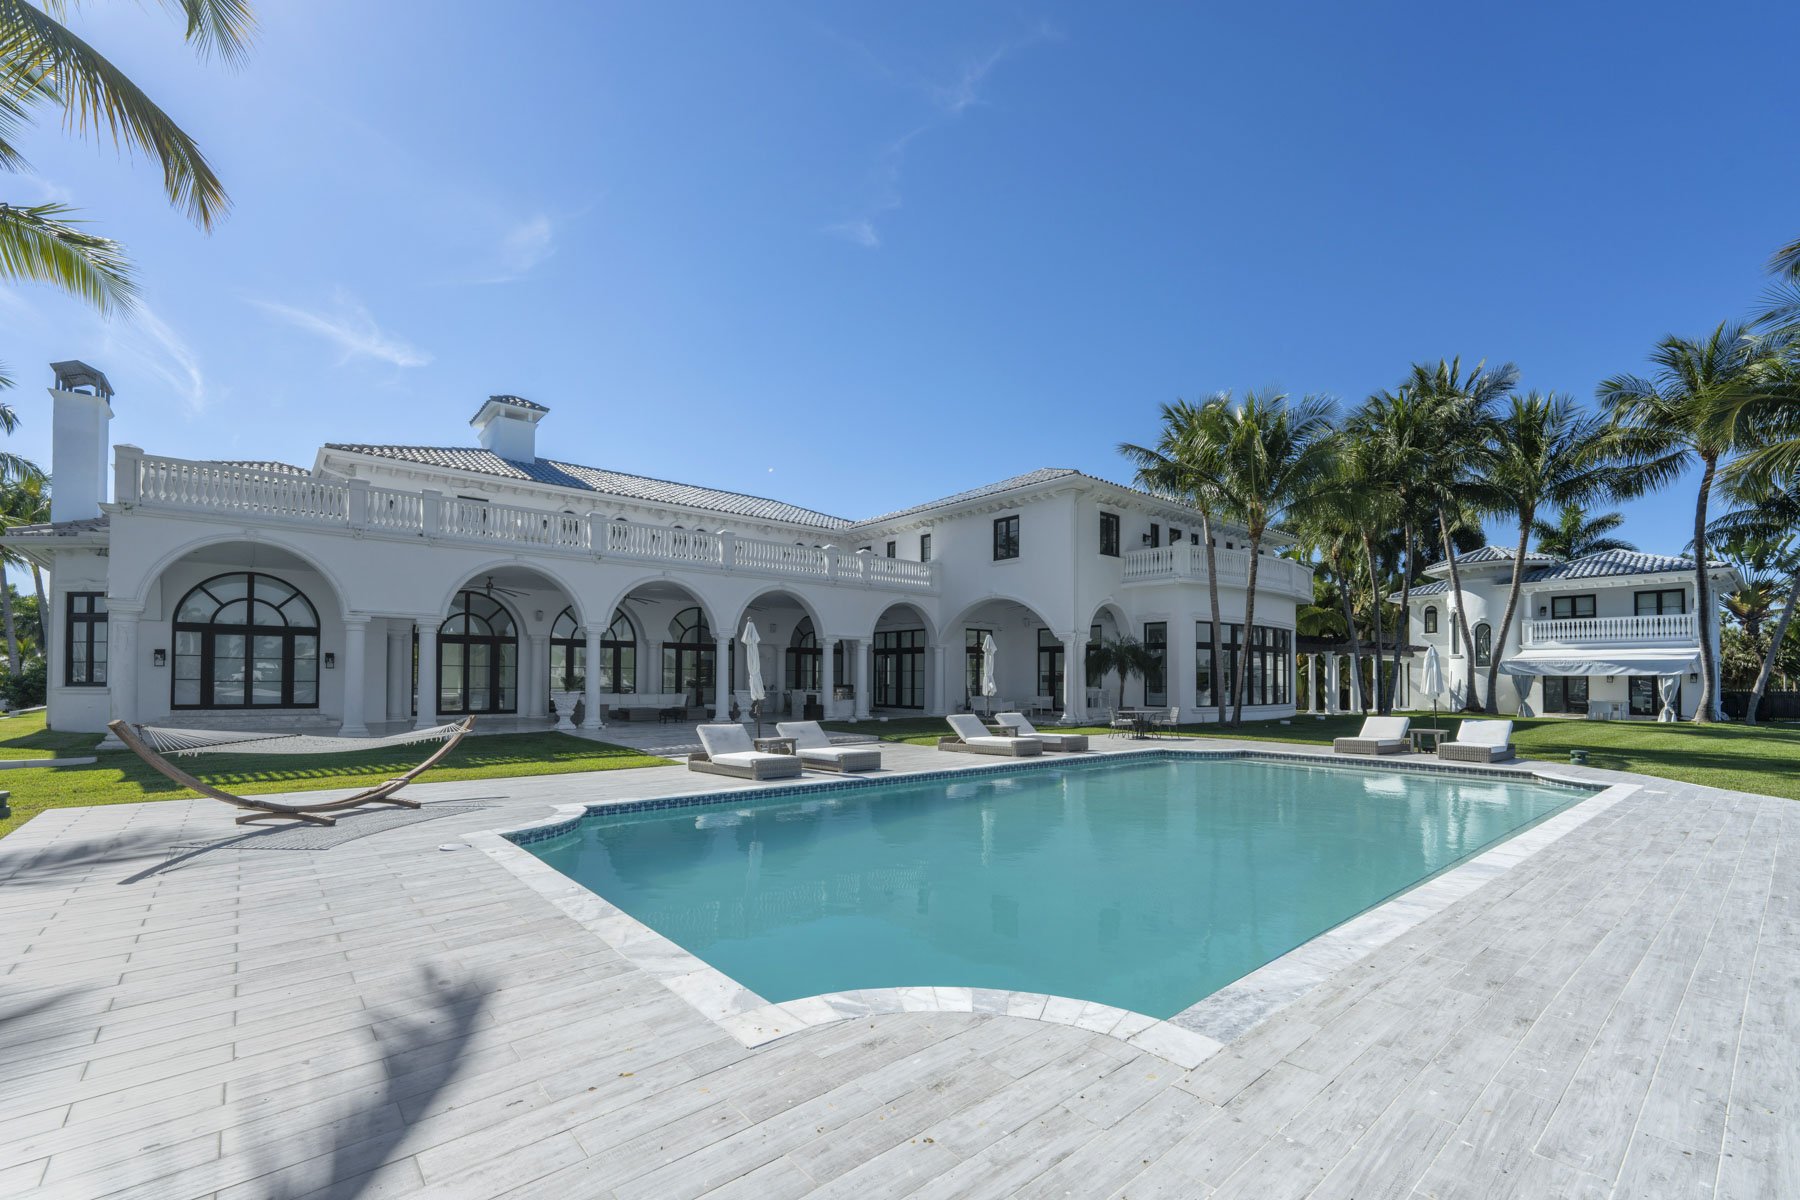 Master Brokers Forum: Check Out This Hollywood Waterfront Estate Asking $16.5 Million 10.jpg